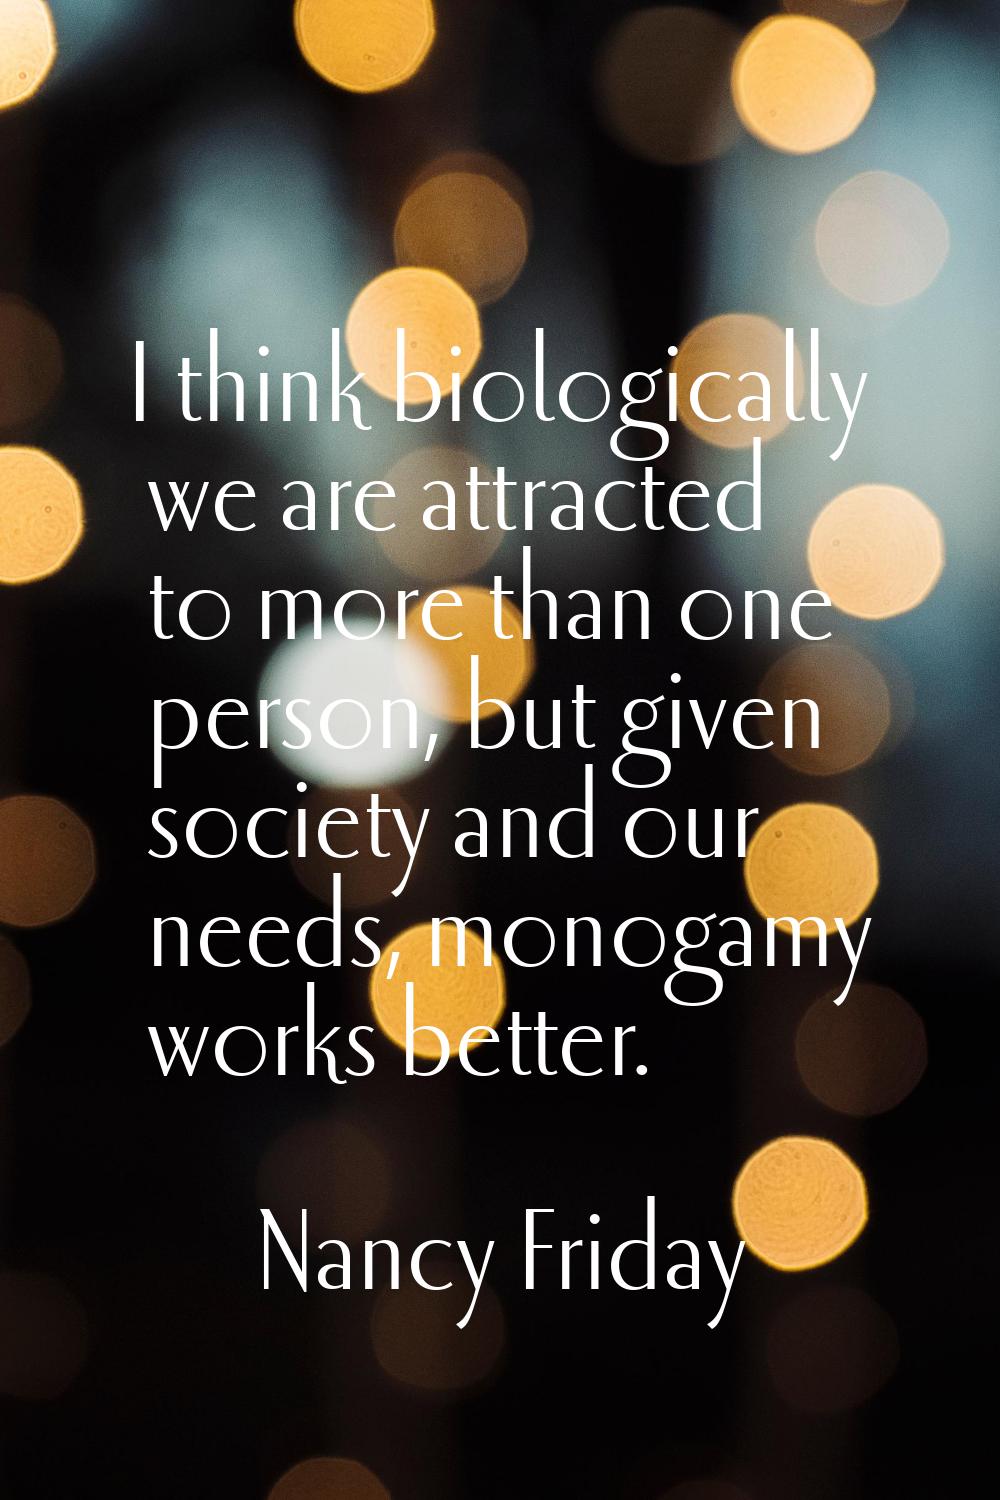 I think biologically we are attracted to more than one person, but given society and our needs, mon